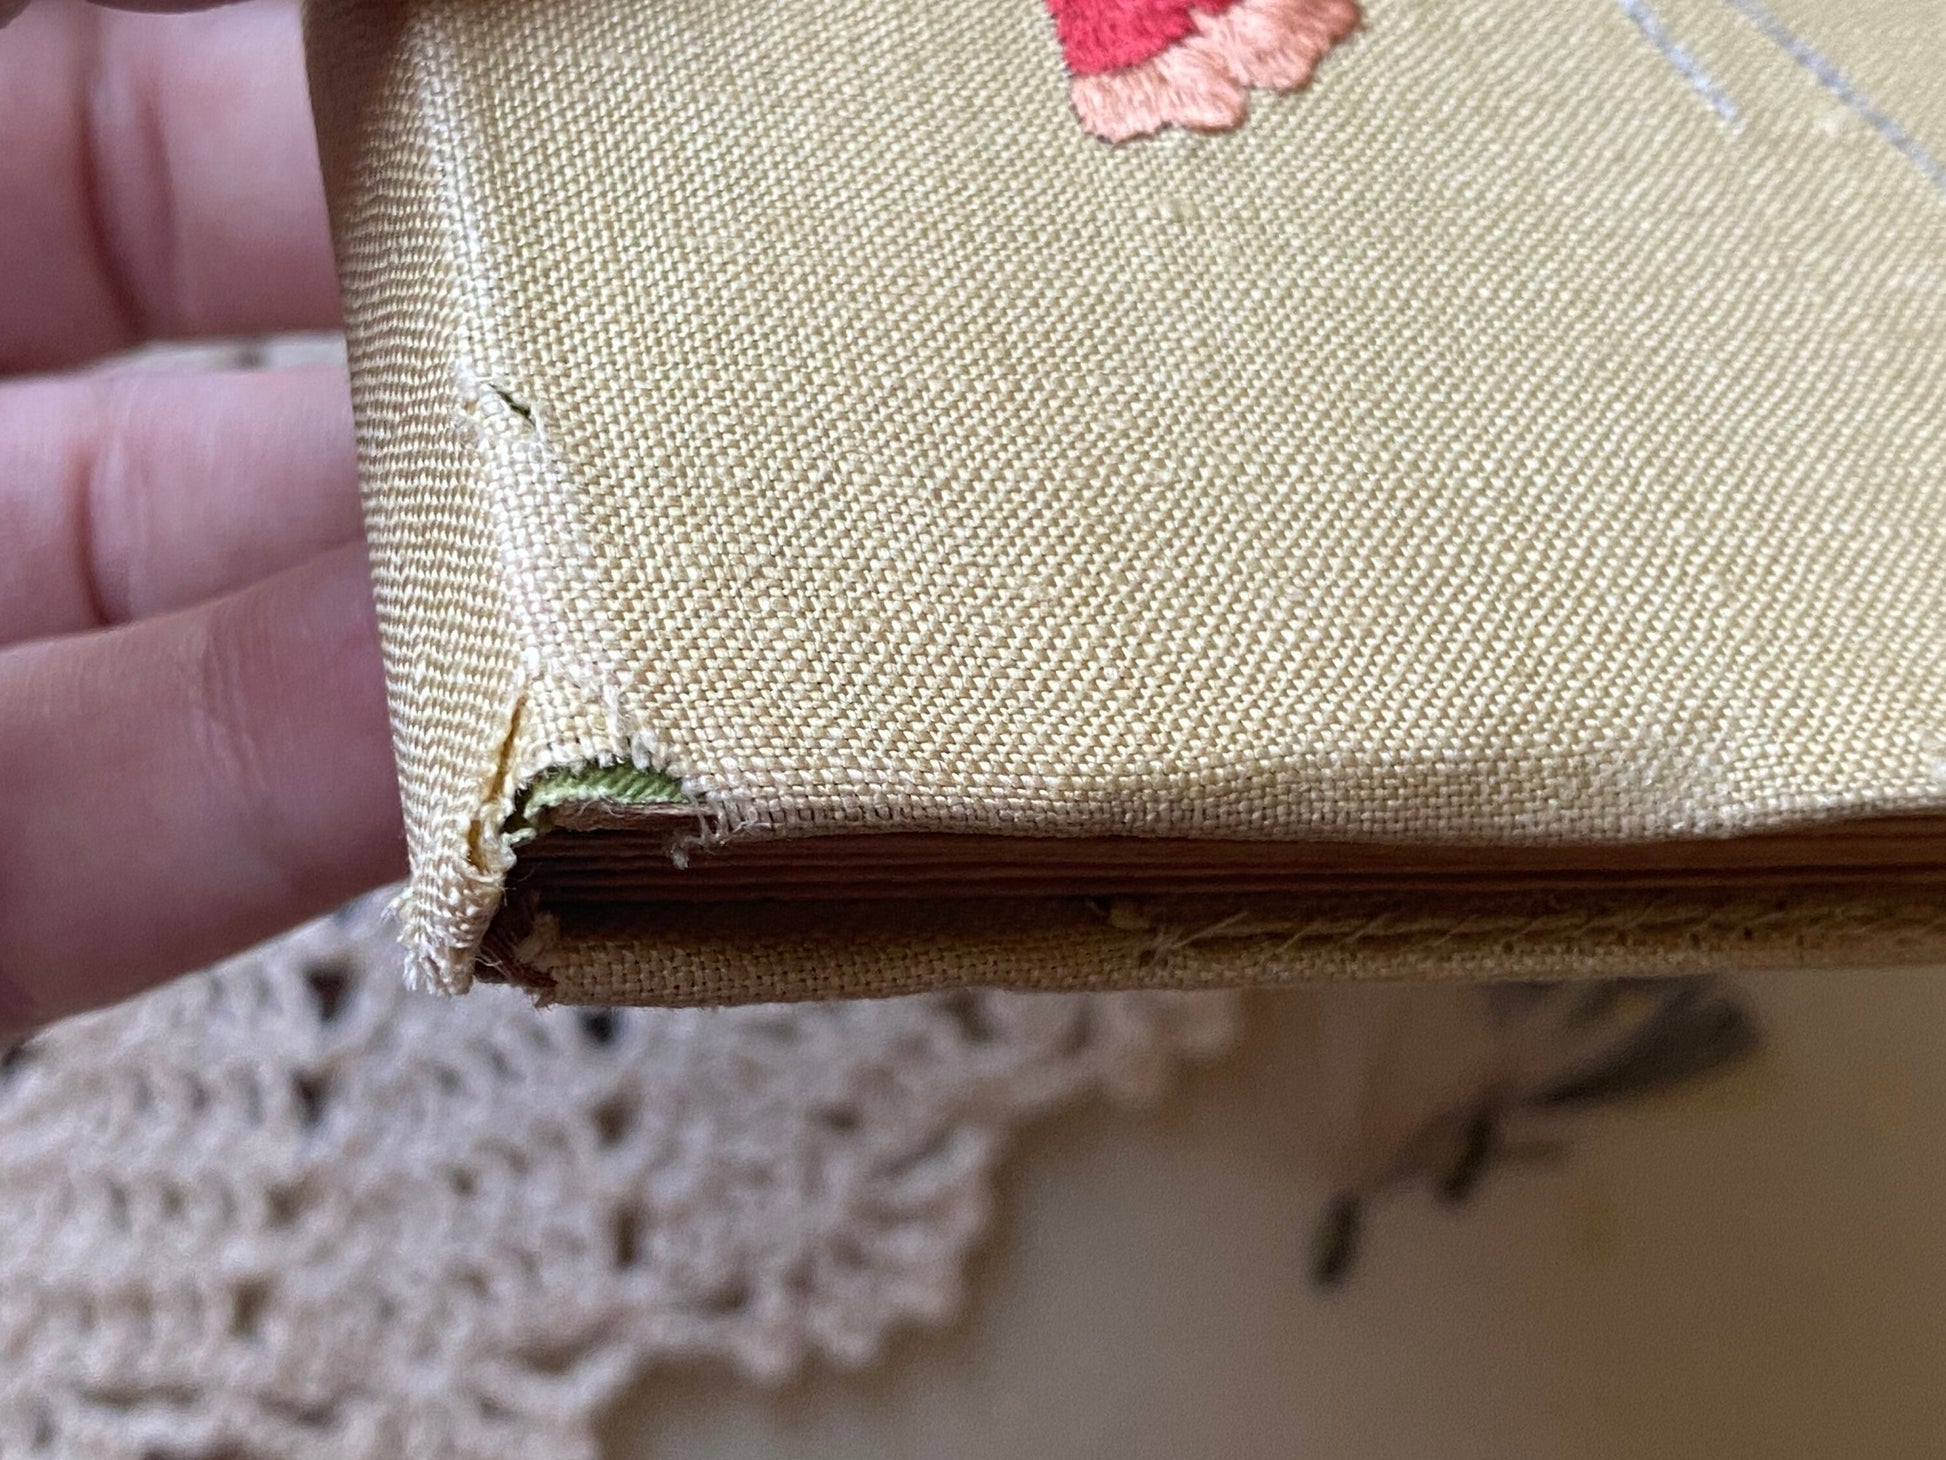 Antique Victorian handmade newspaper clippings book with floral embroidered fabric cover. One of a kind Victorian scrapbook keepsake album.